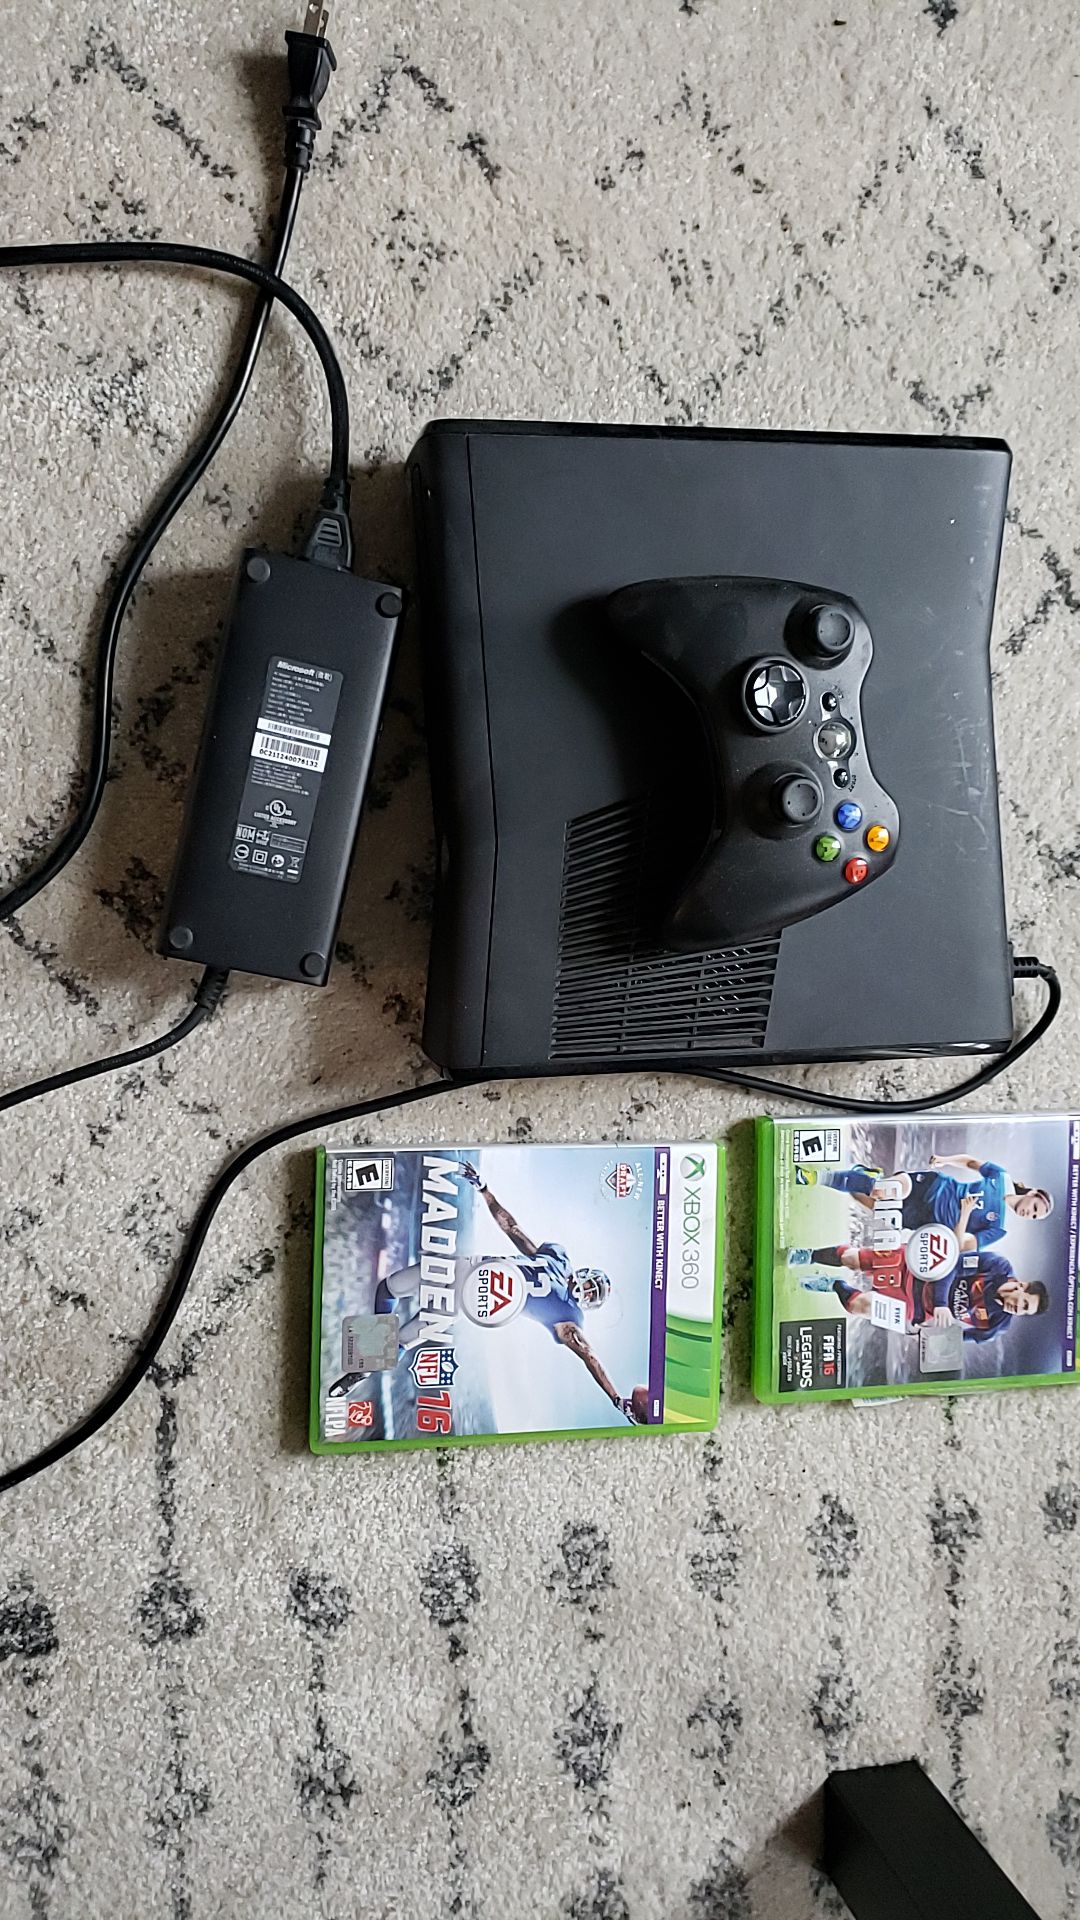 Xbox360 with controller and two games